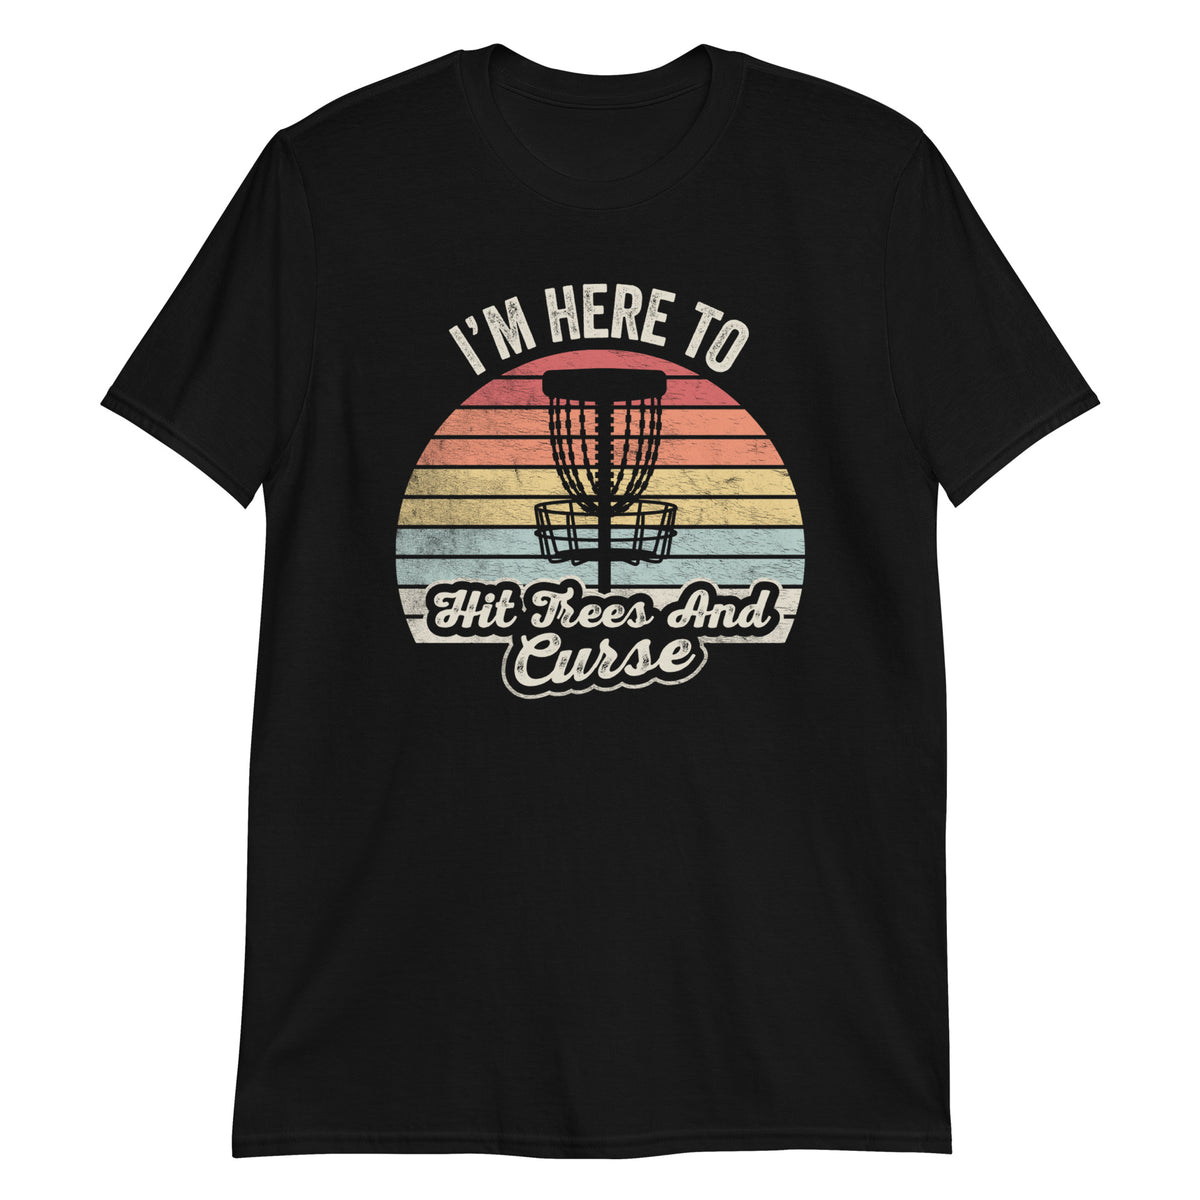 I'm Here to Hit Trees and Curse T-Shirt